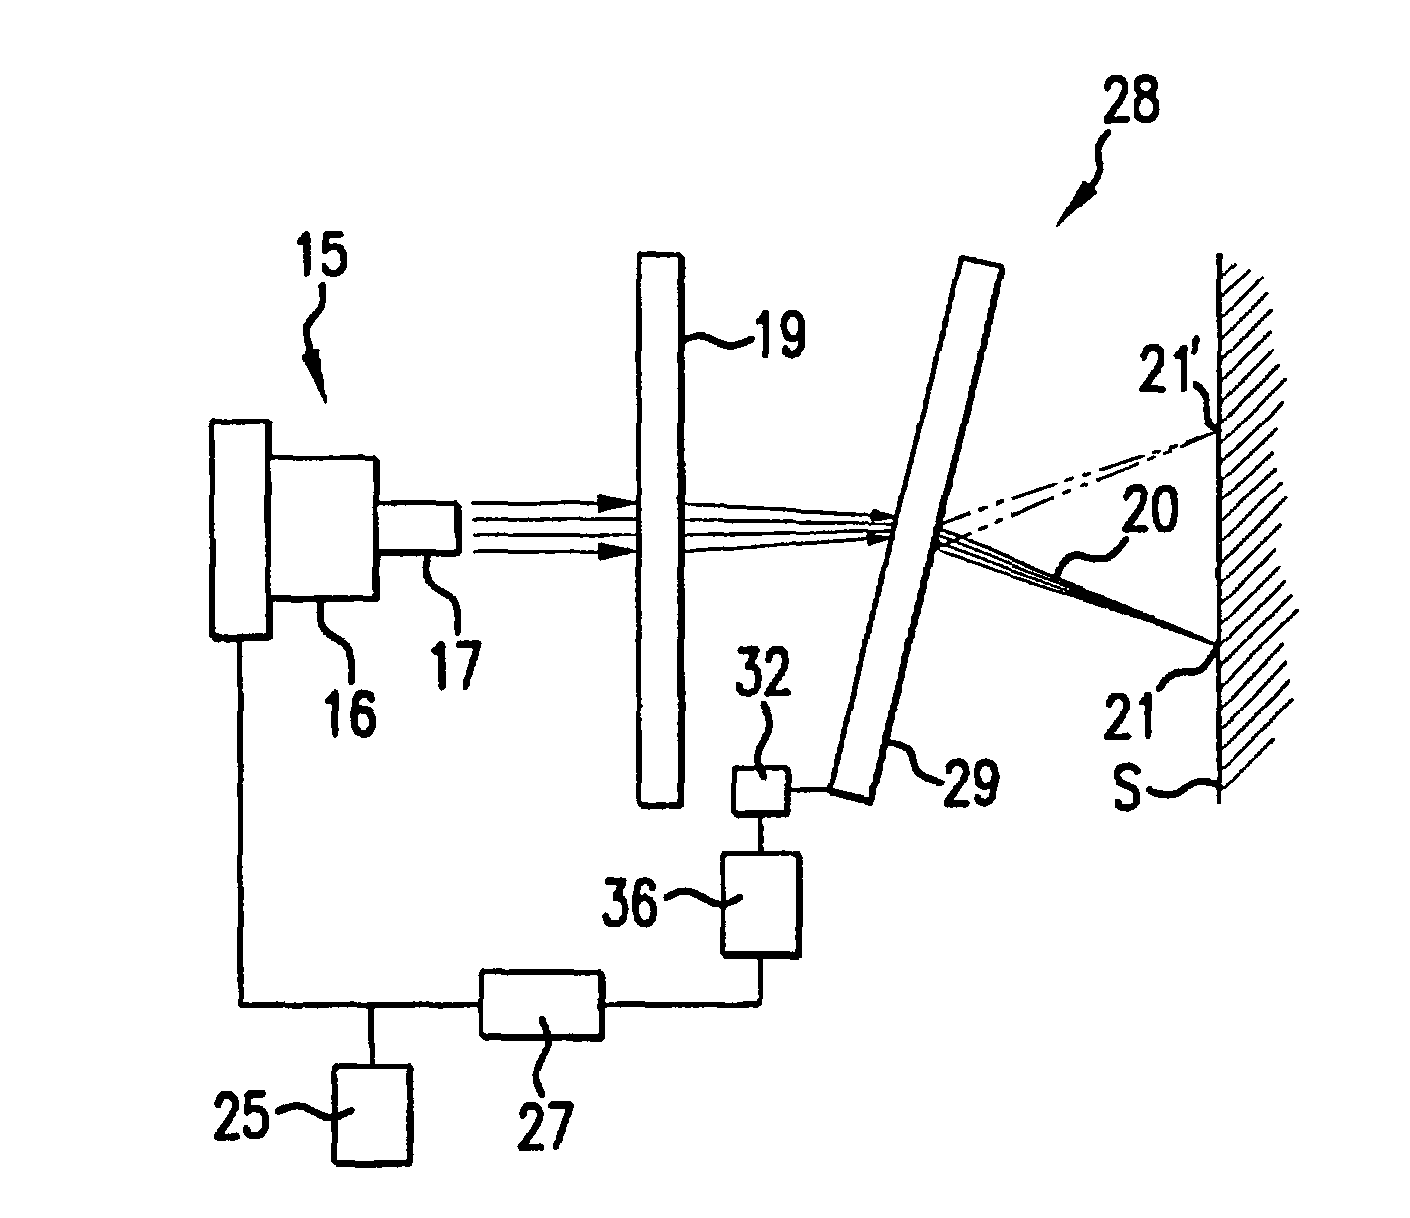 Light beam generation, and focusing and redirecting device